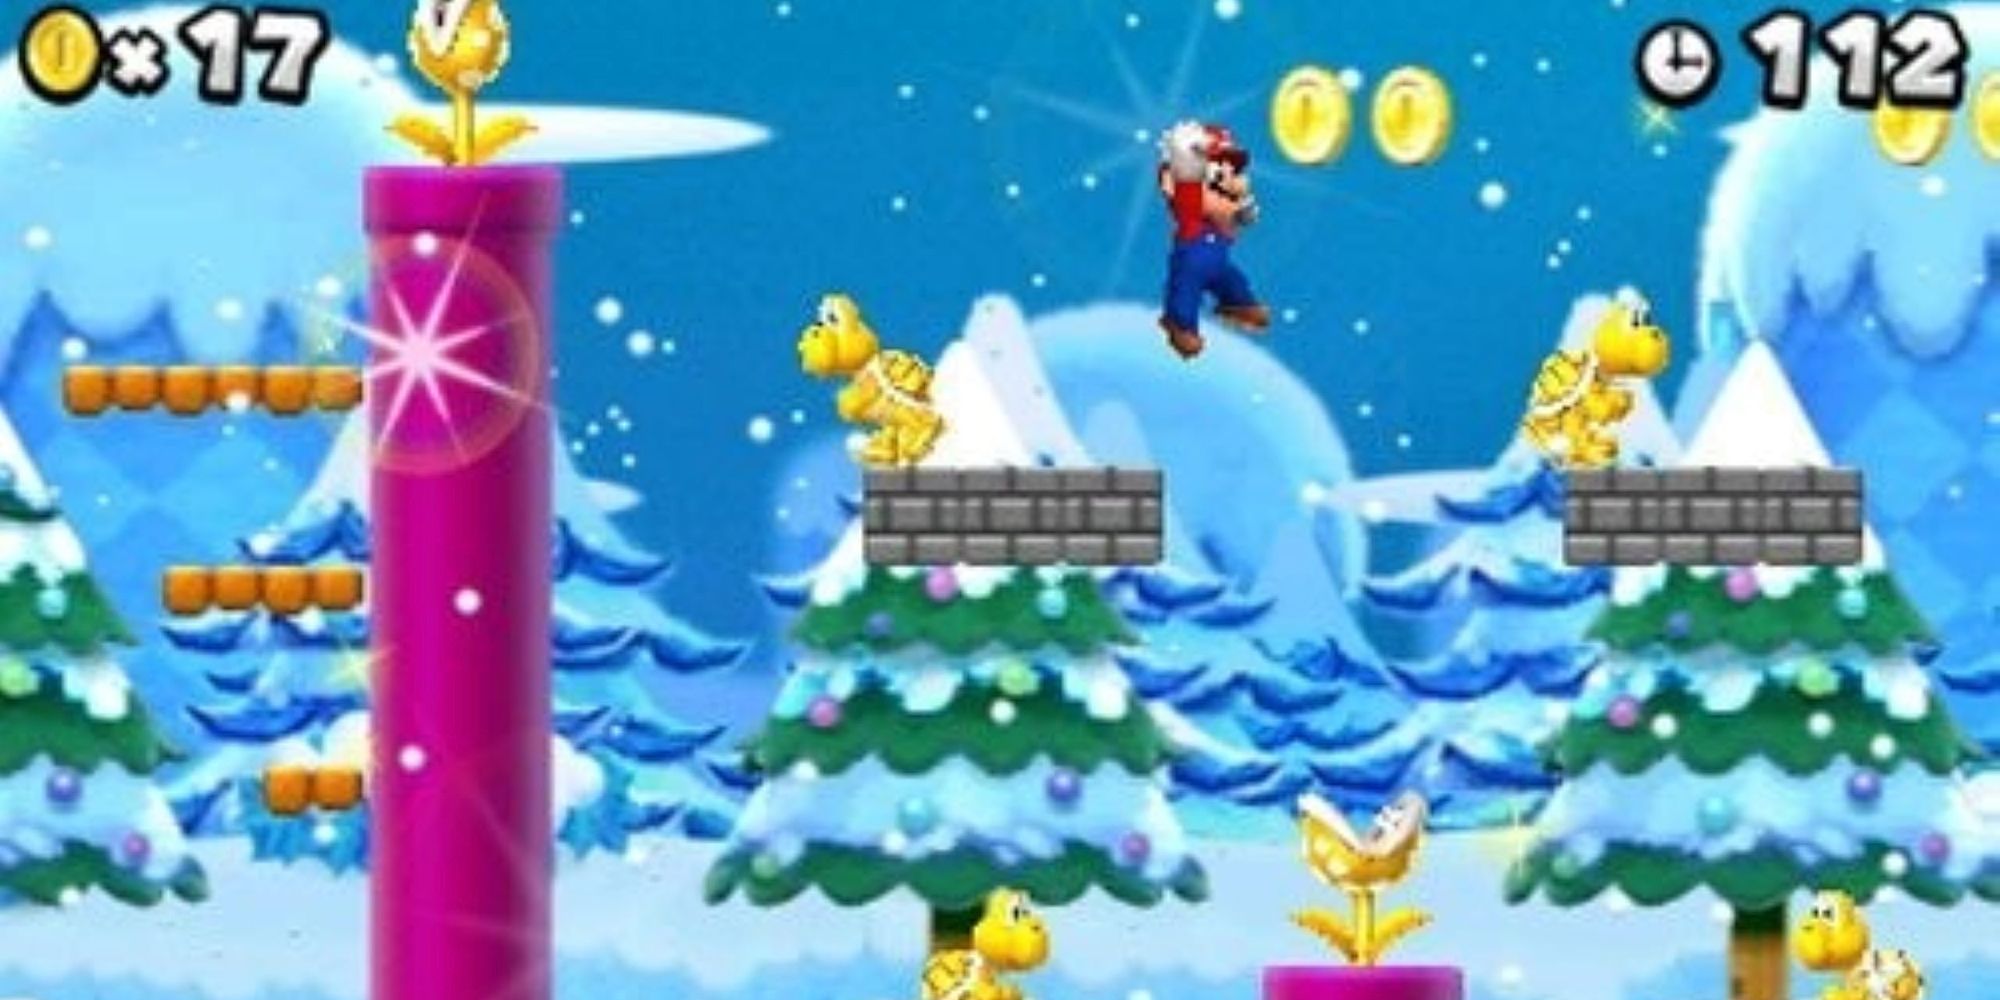 Mario jumping over gold enemies in a snow level